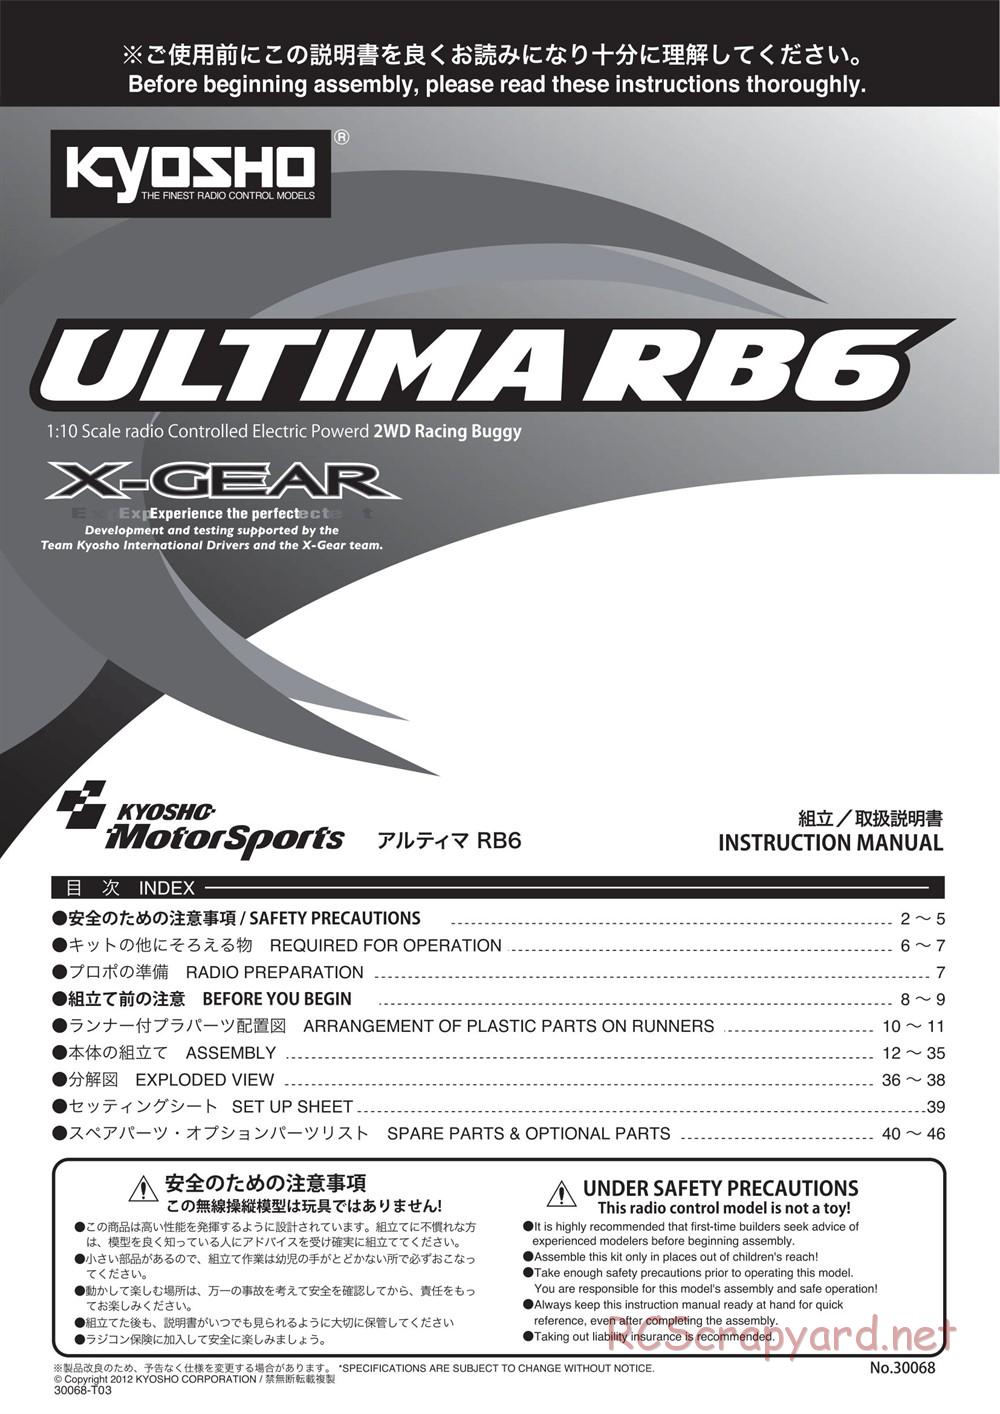 Kyosho - Ultima RB6 - Manual - Page 1